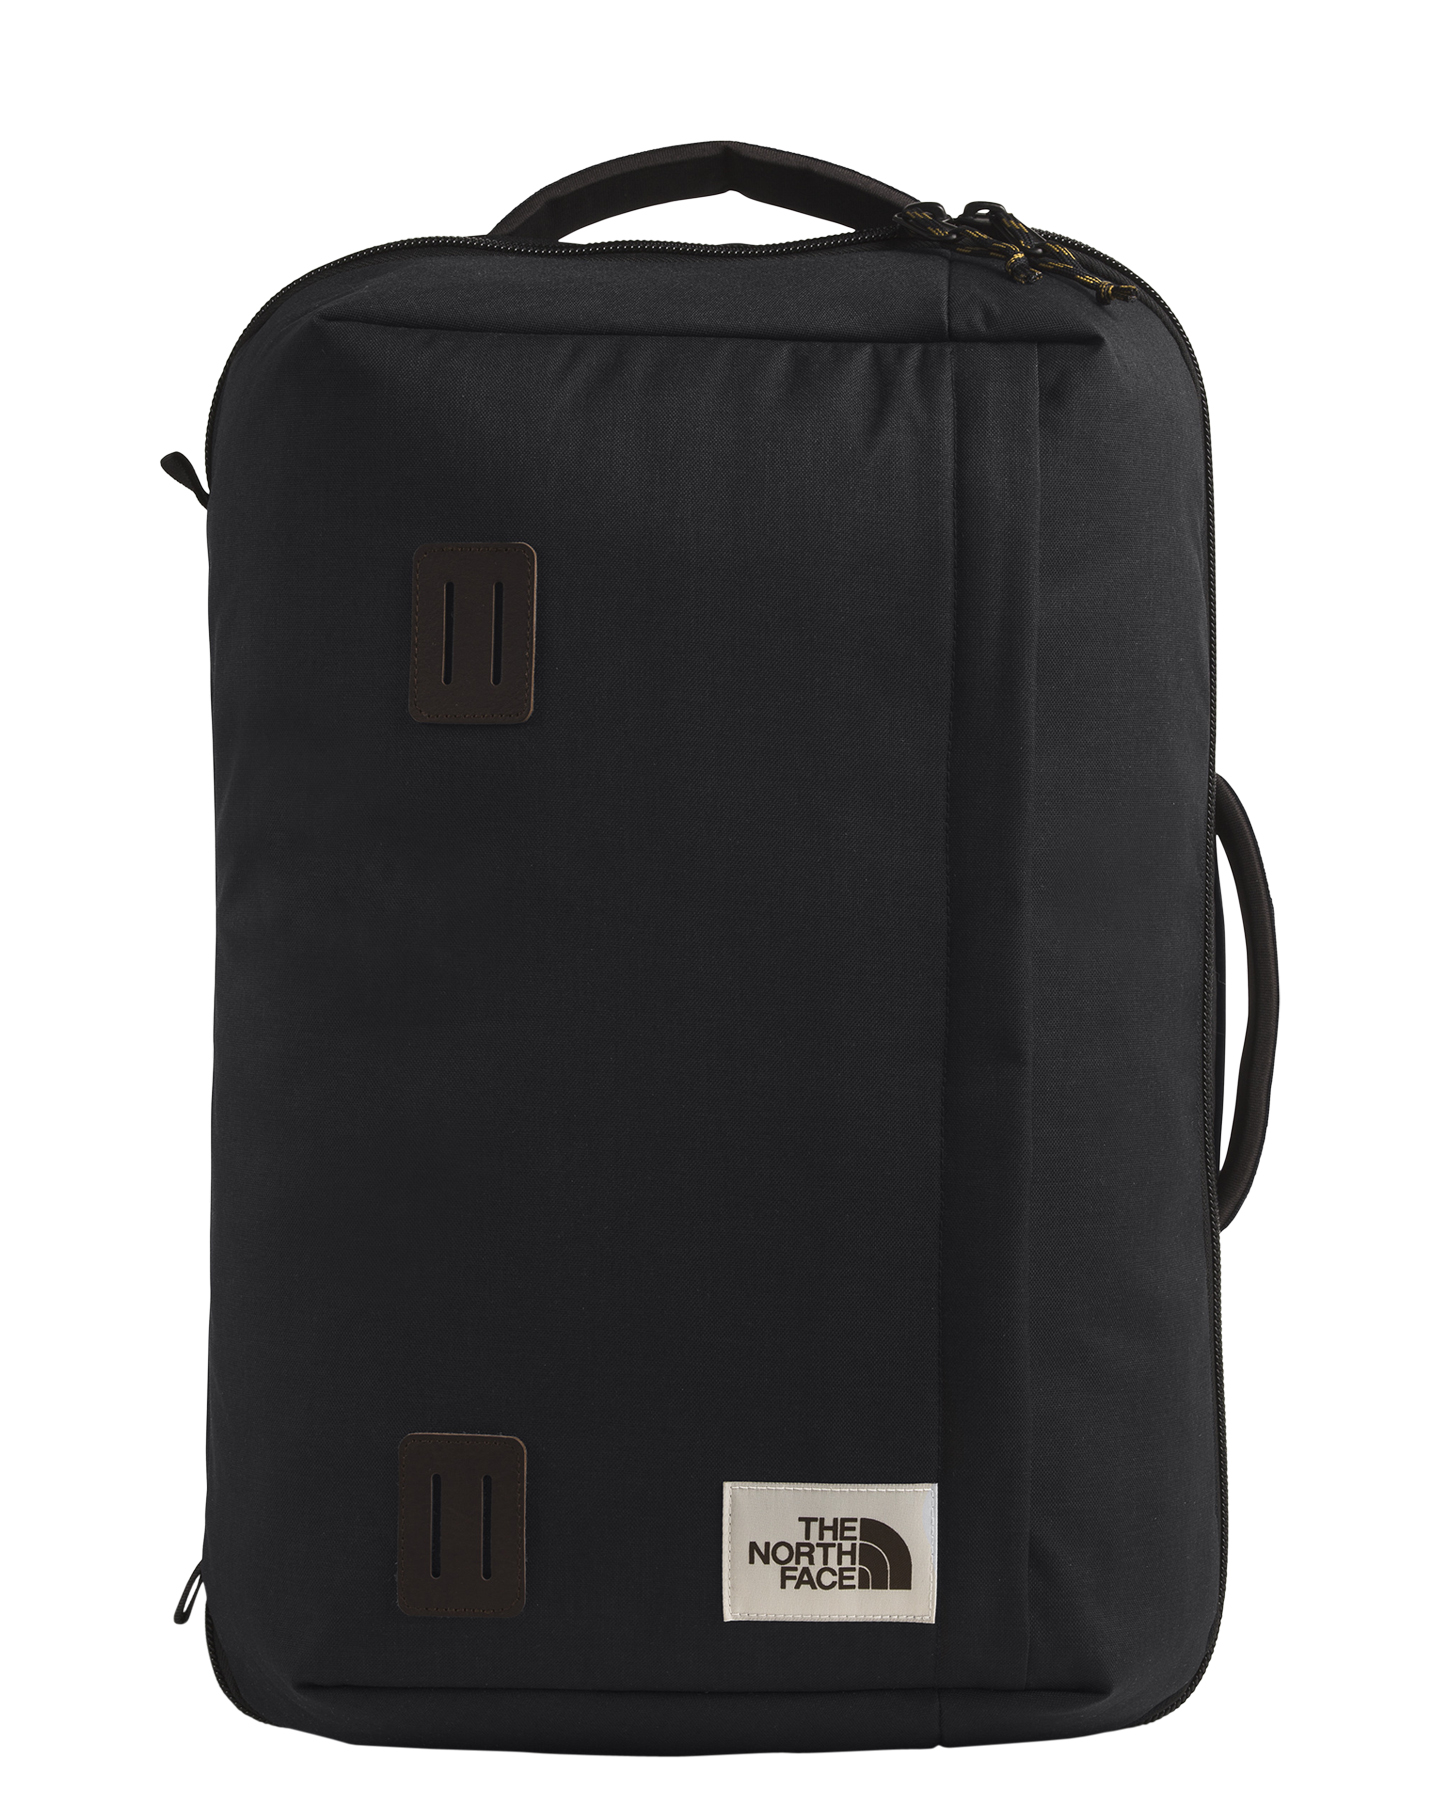 the north face mens travel bag Cheaper 